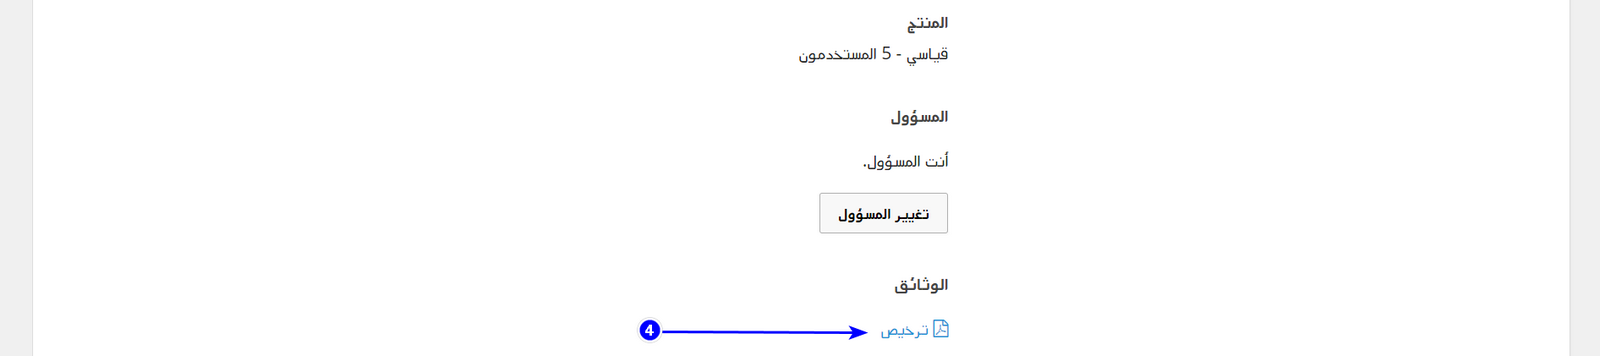 How_do_I_get_my_license_document.invitation_link_-_Arabic_2.png